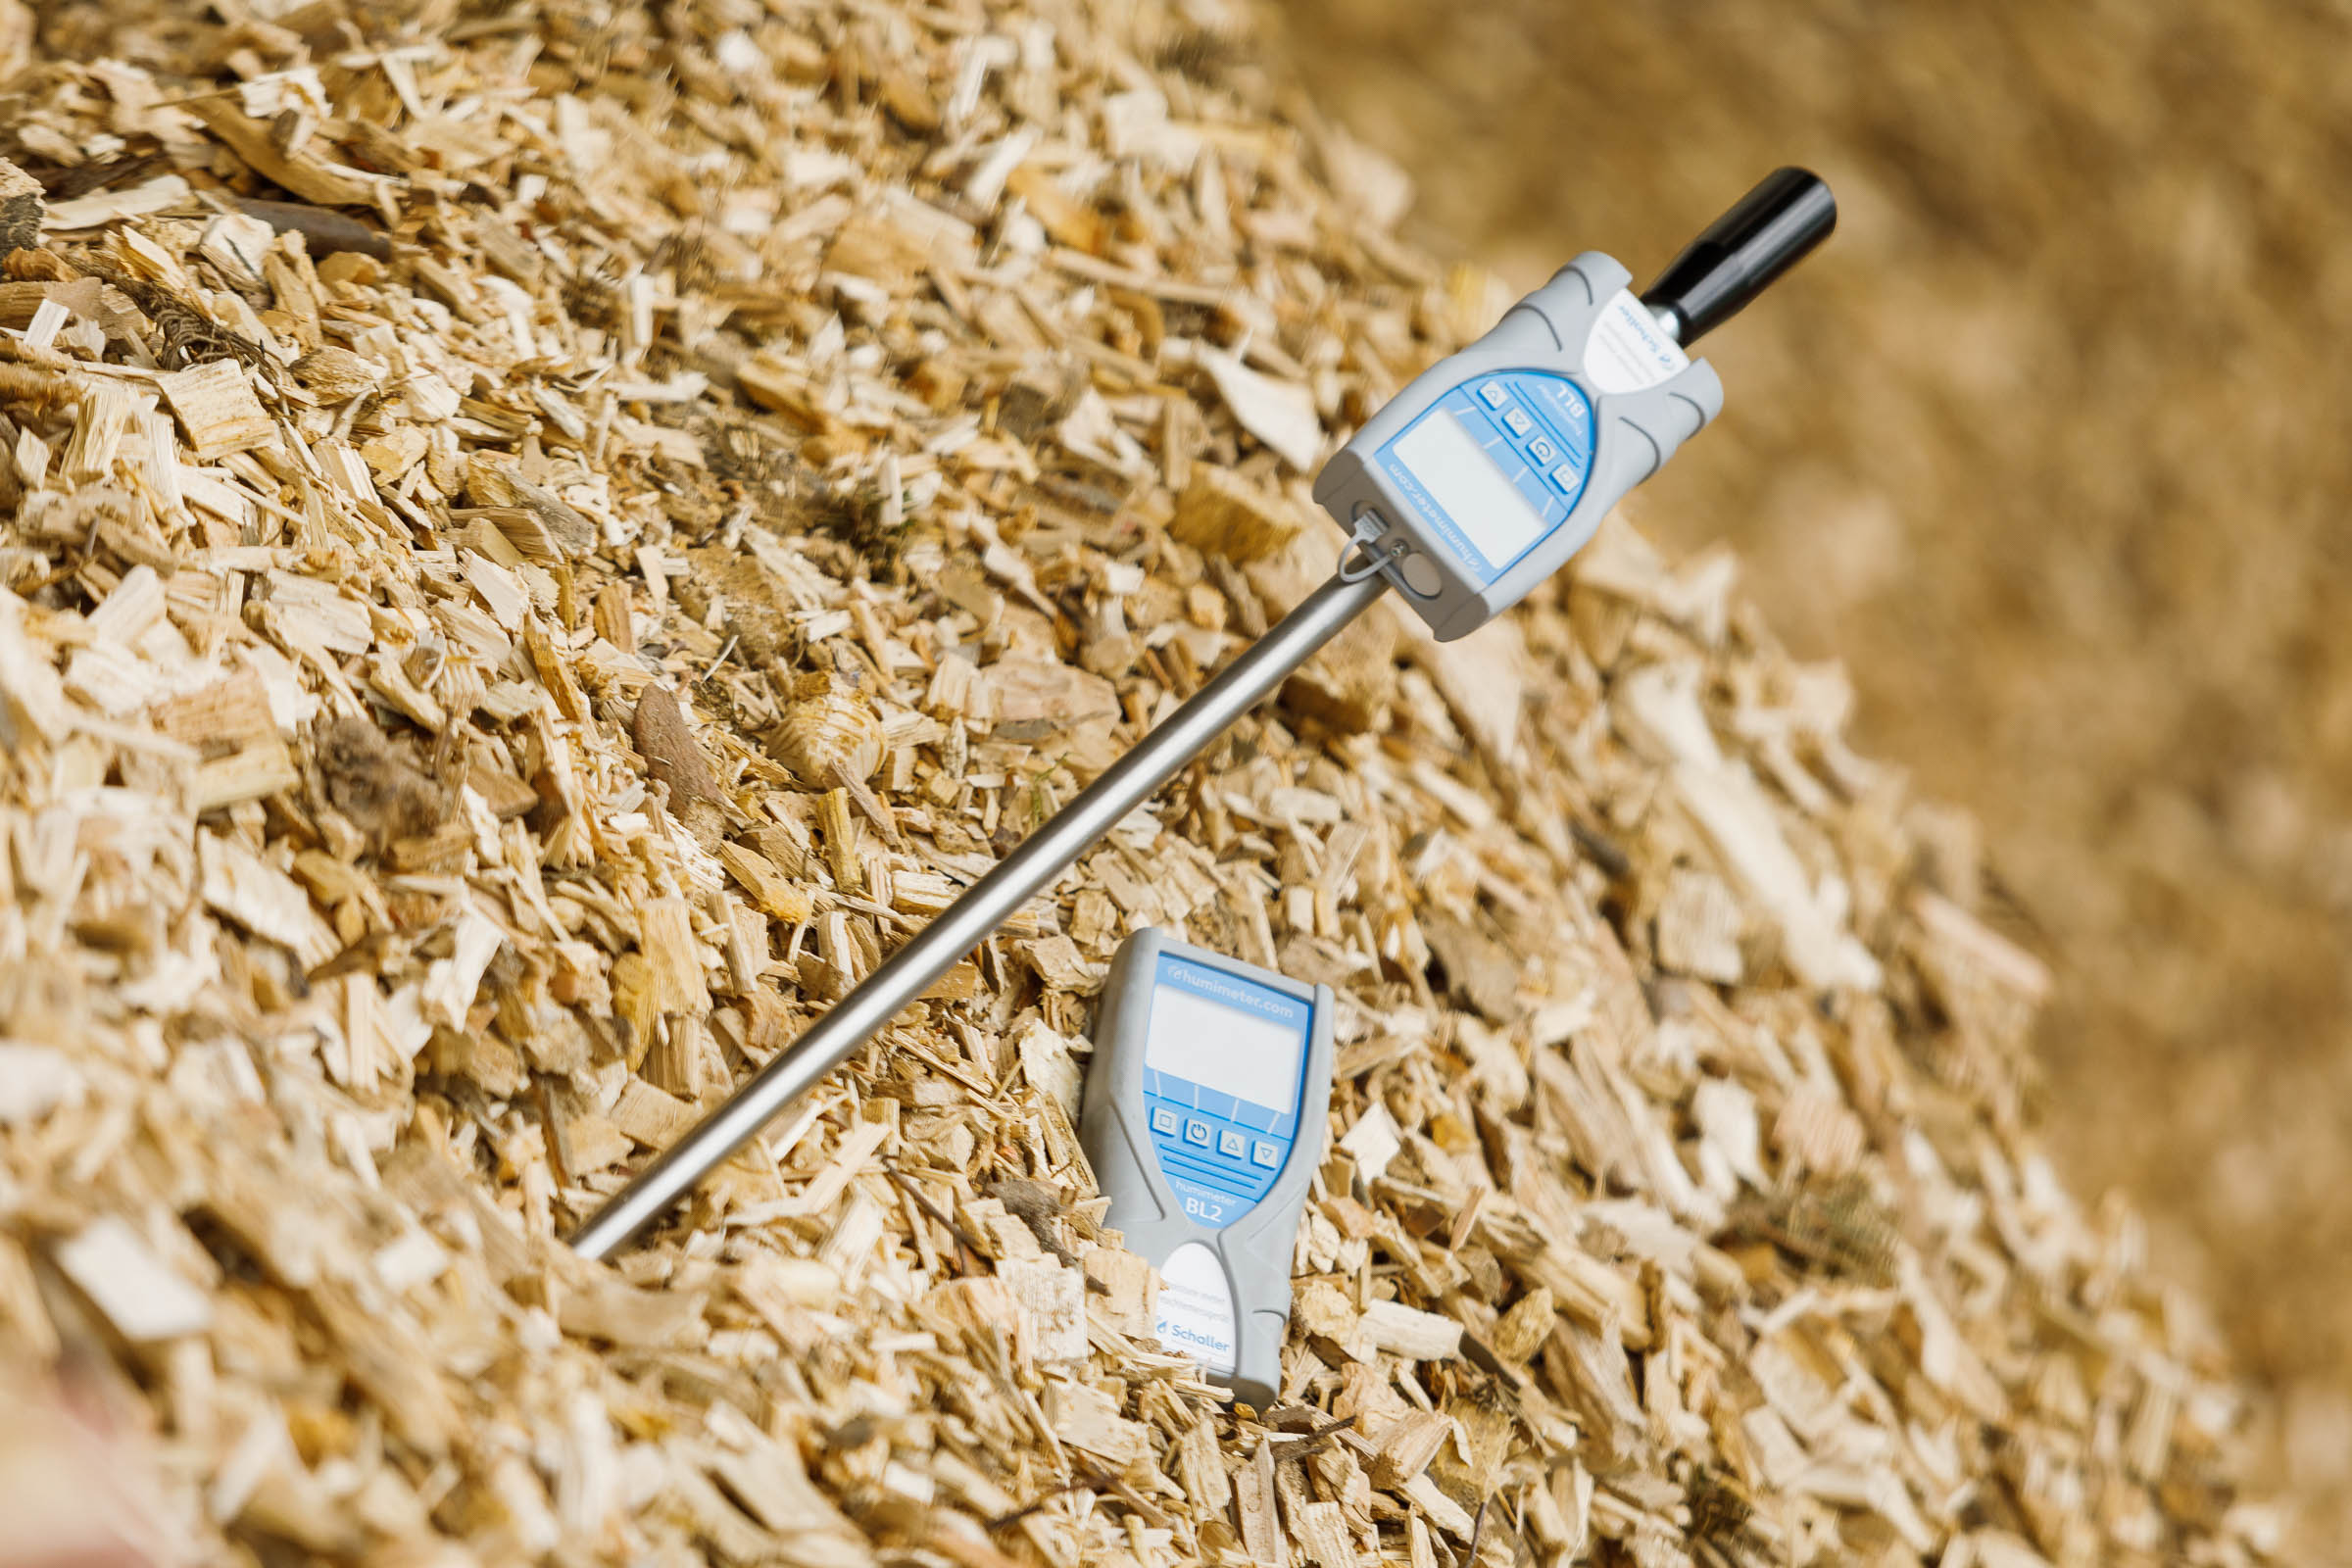 humimeter BLL & humimeter BL2 Moisture measuring devices for wood chips - placed on the wood chip pile